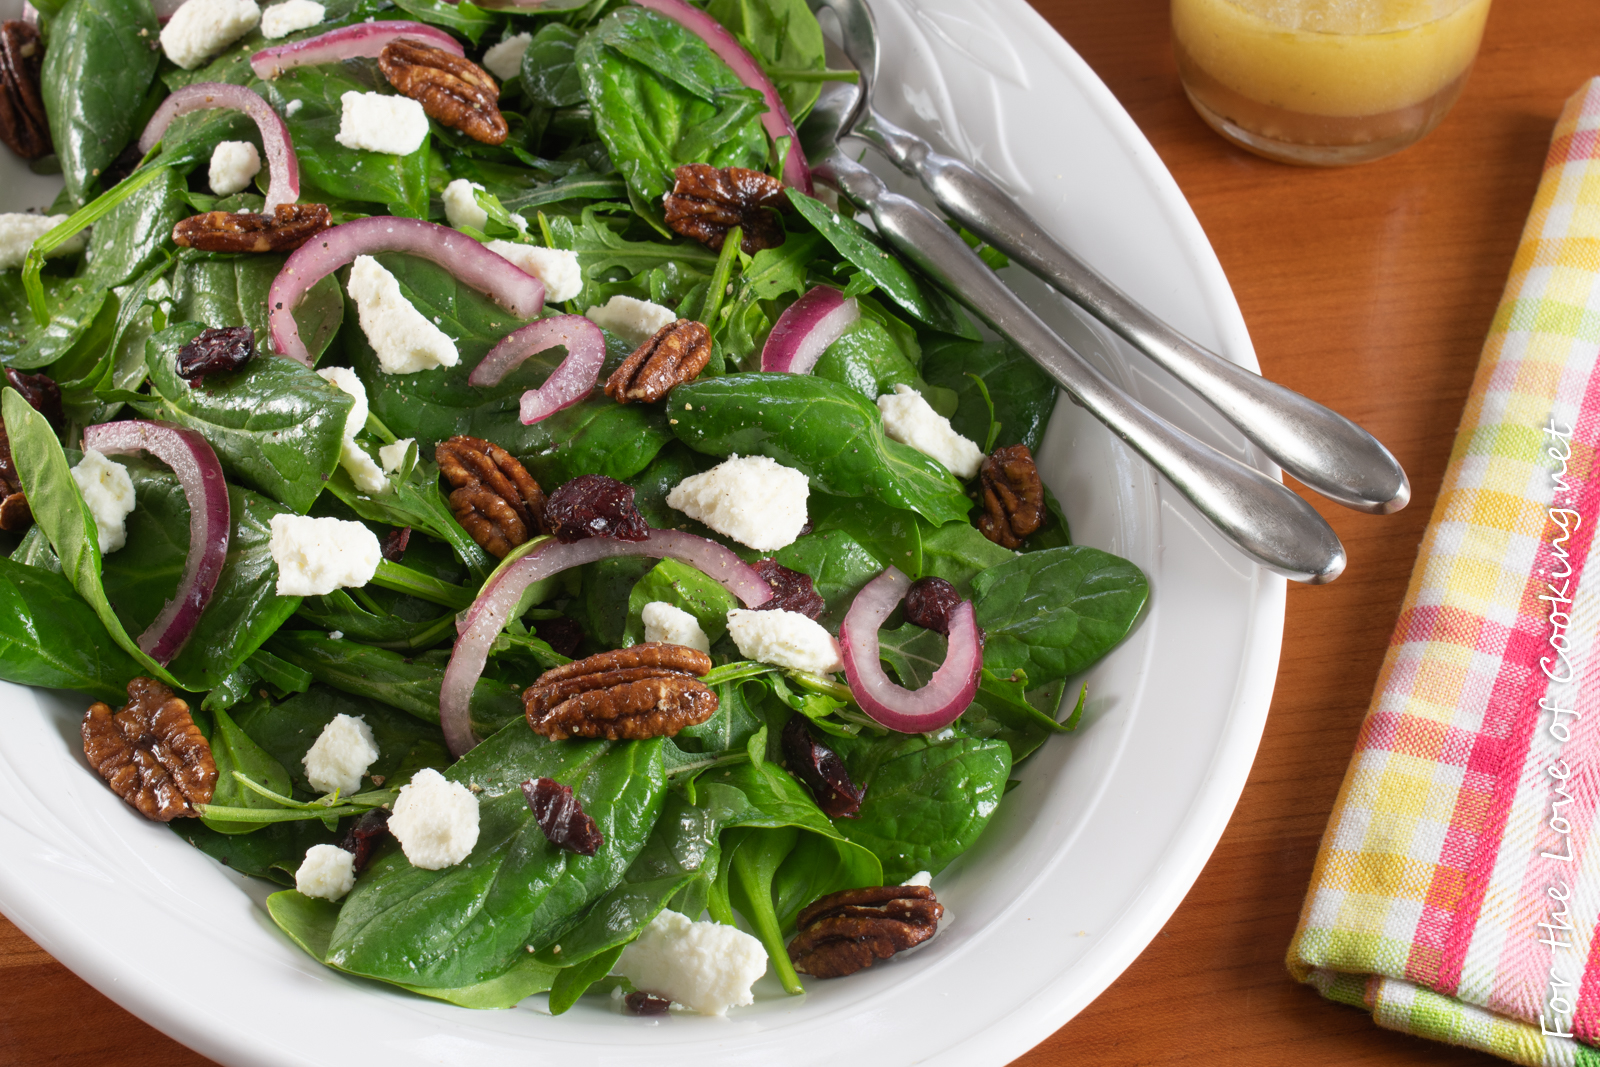 Spinach & Arugula Salad with Marinated Onion, Feta, Cranberry, and Candied Pecans